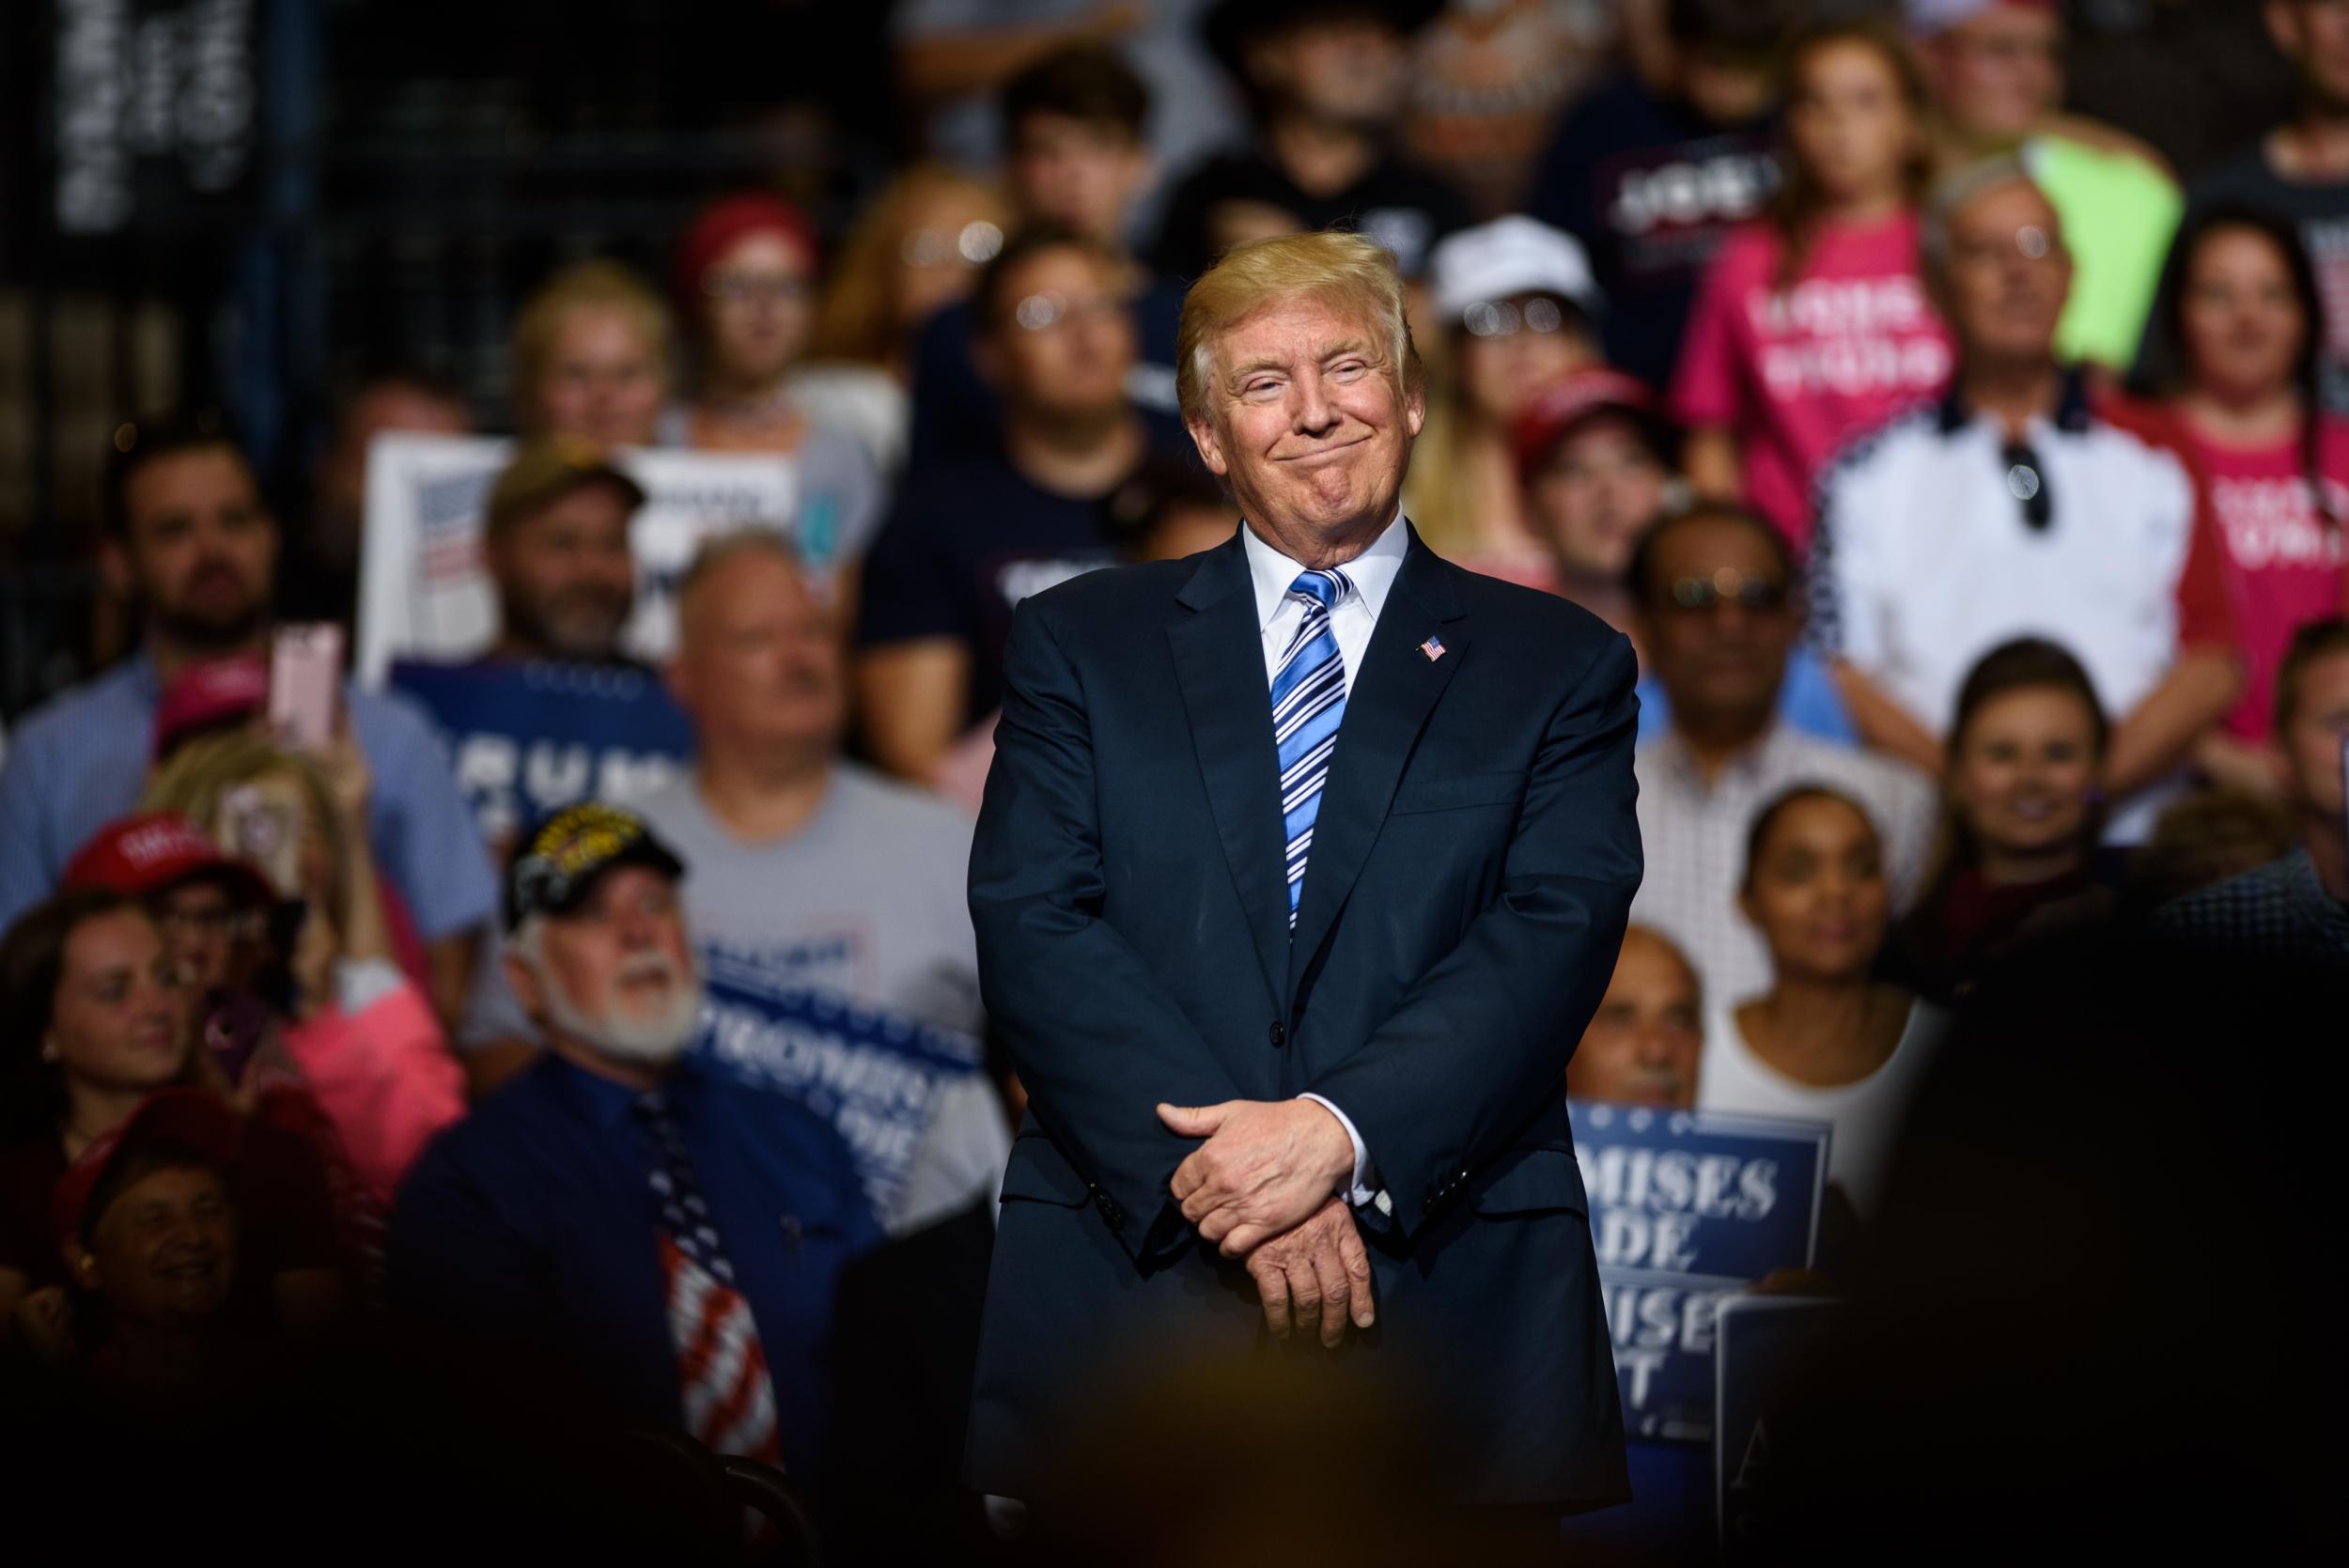 President Donald Trump listens to West Virginia Governor Jim Justice speak at the President's campaign rally